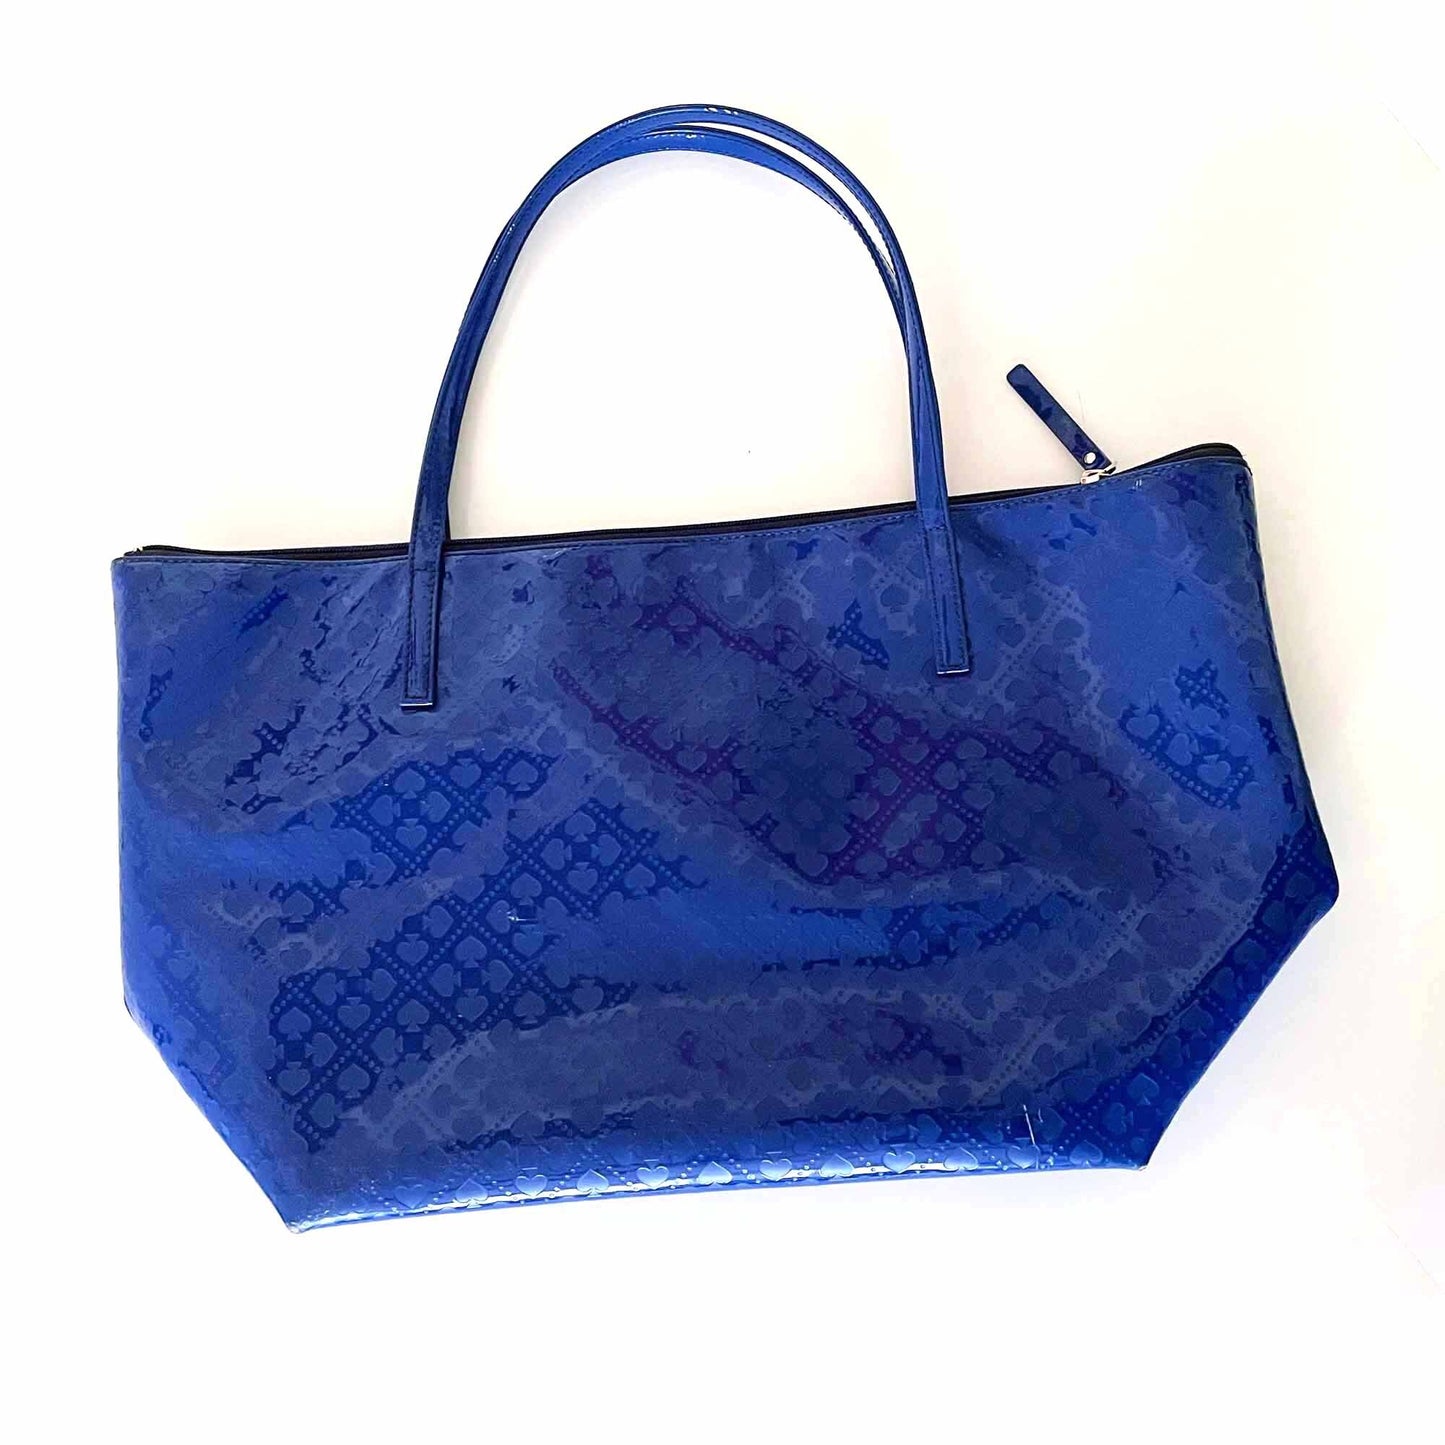 kate spade blue patent leather tote carry-all bag